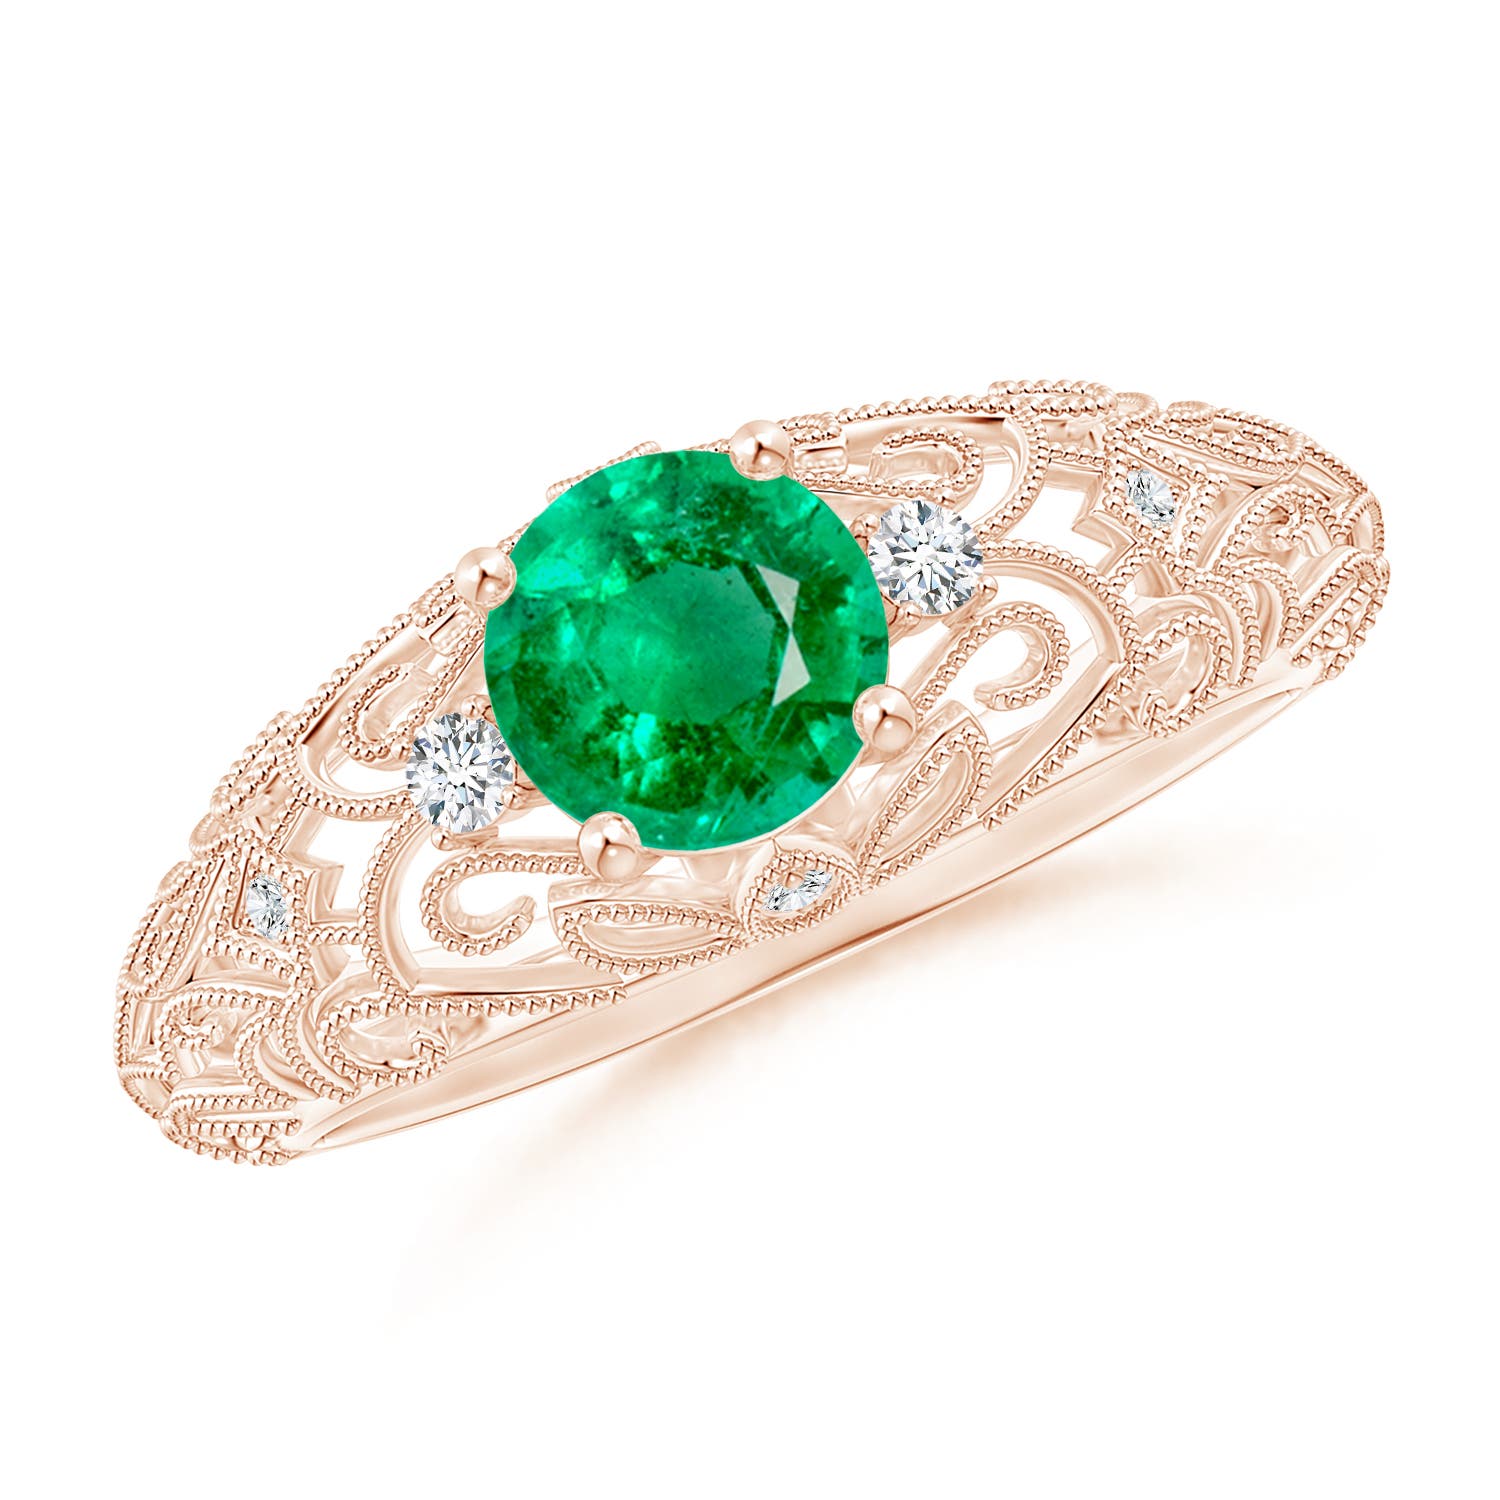 AAA - Emerald / 0.82 CT / 14 KT Rose Gold